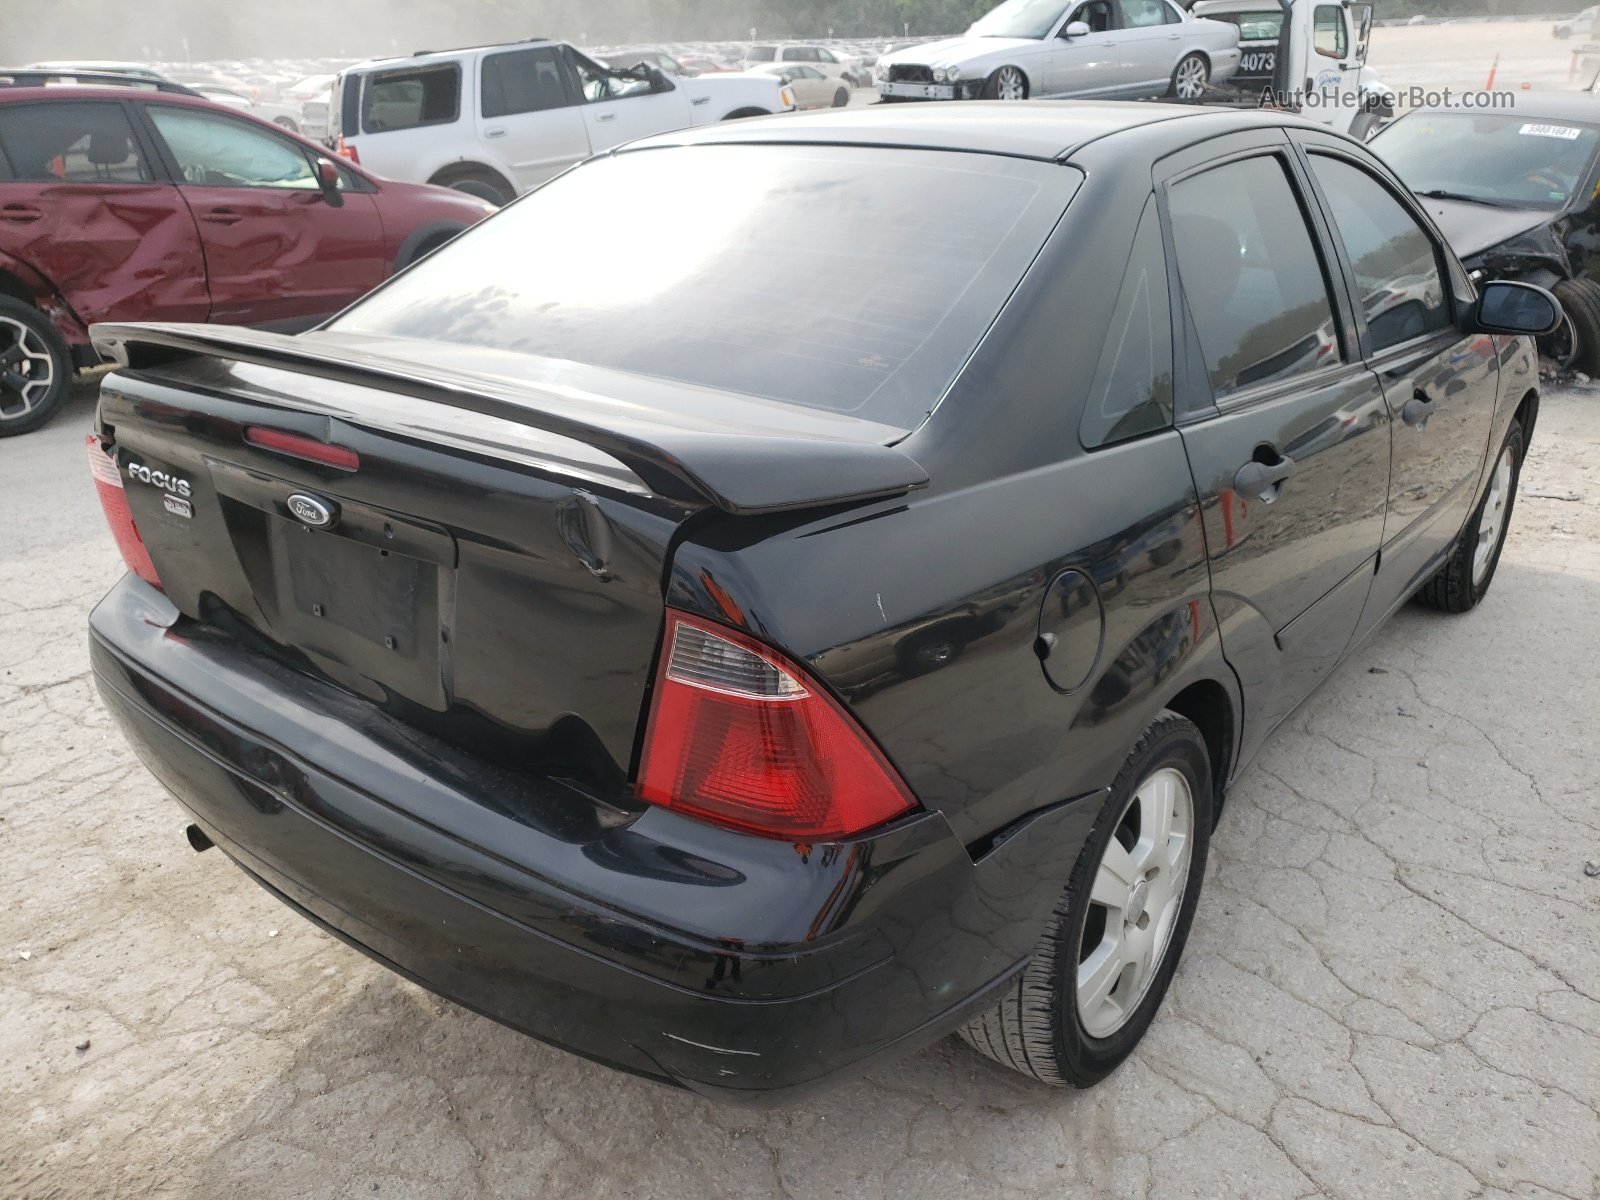 Price & History 2007 Ford Focus Zx4 2.0l 4 vin: 1FAFP34N57W137980 